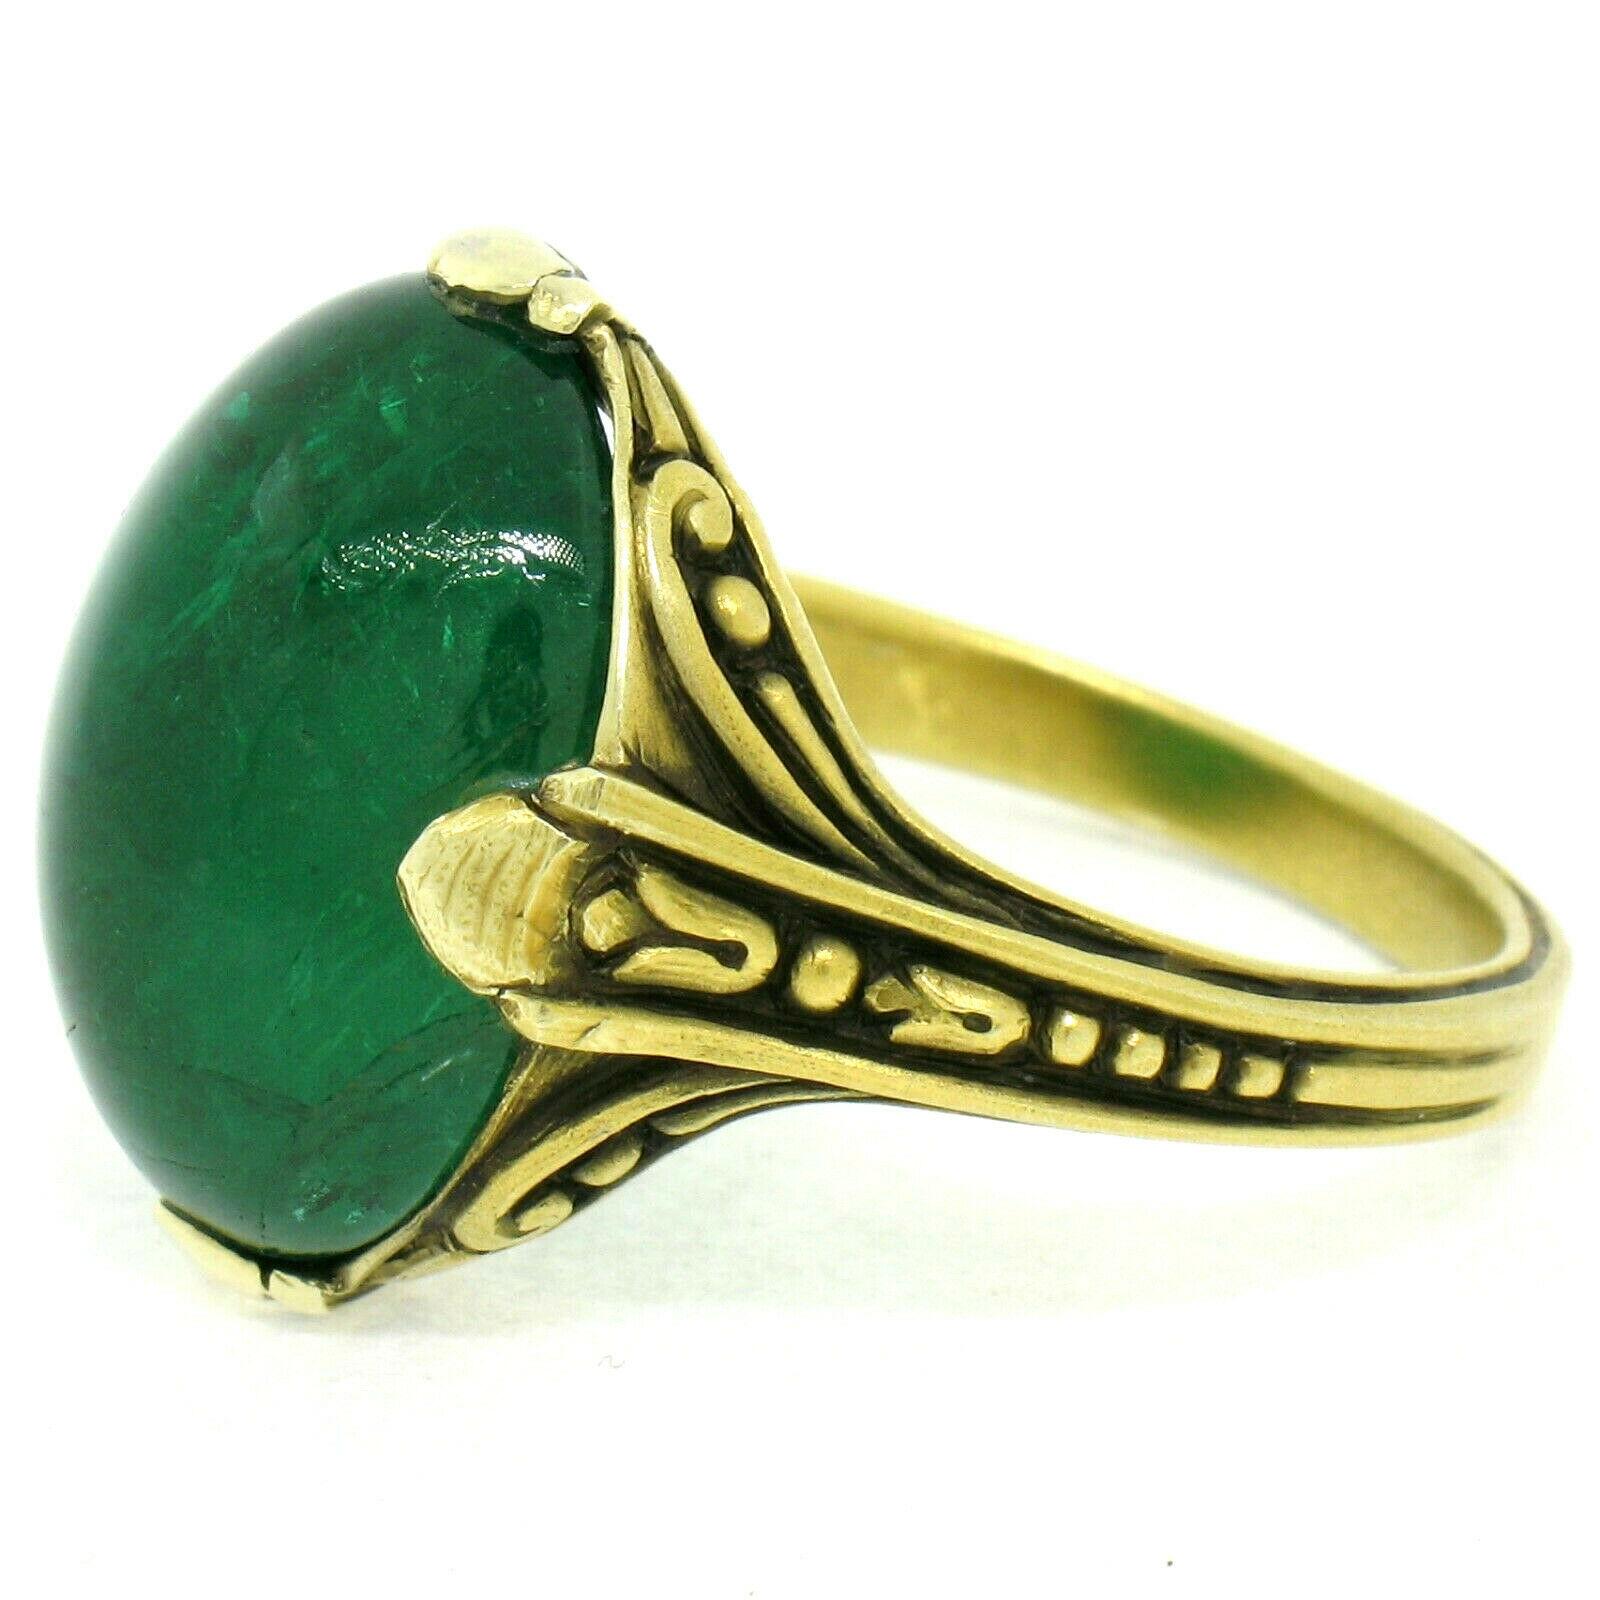 Women's Antique 14k Gold 10.03ct GIA Oval Cabochon Very Fine Green Zambian Emerald Ring